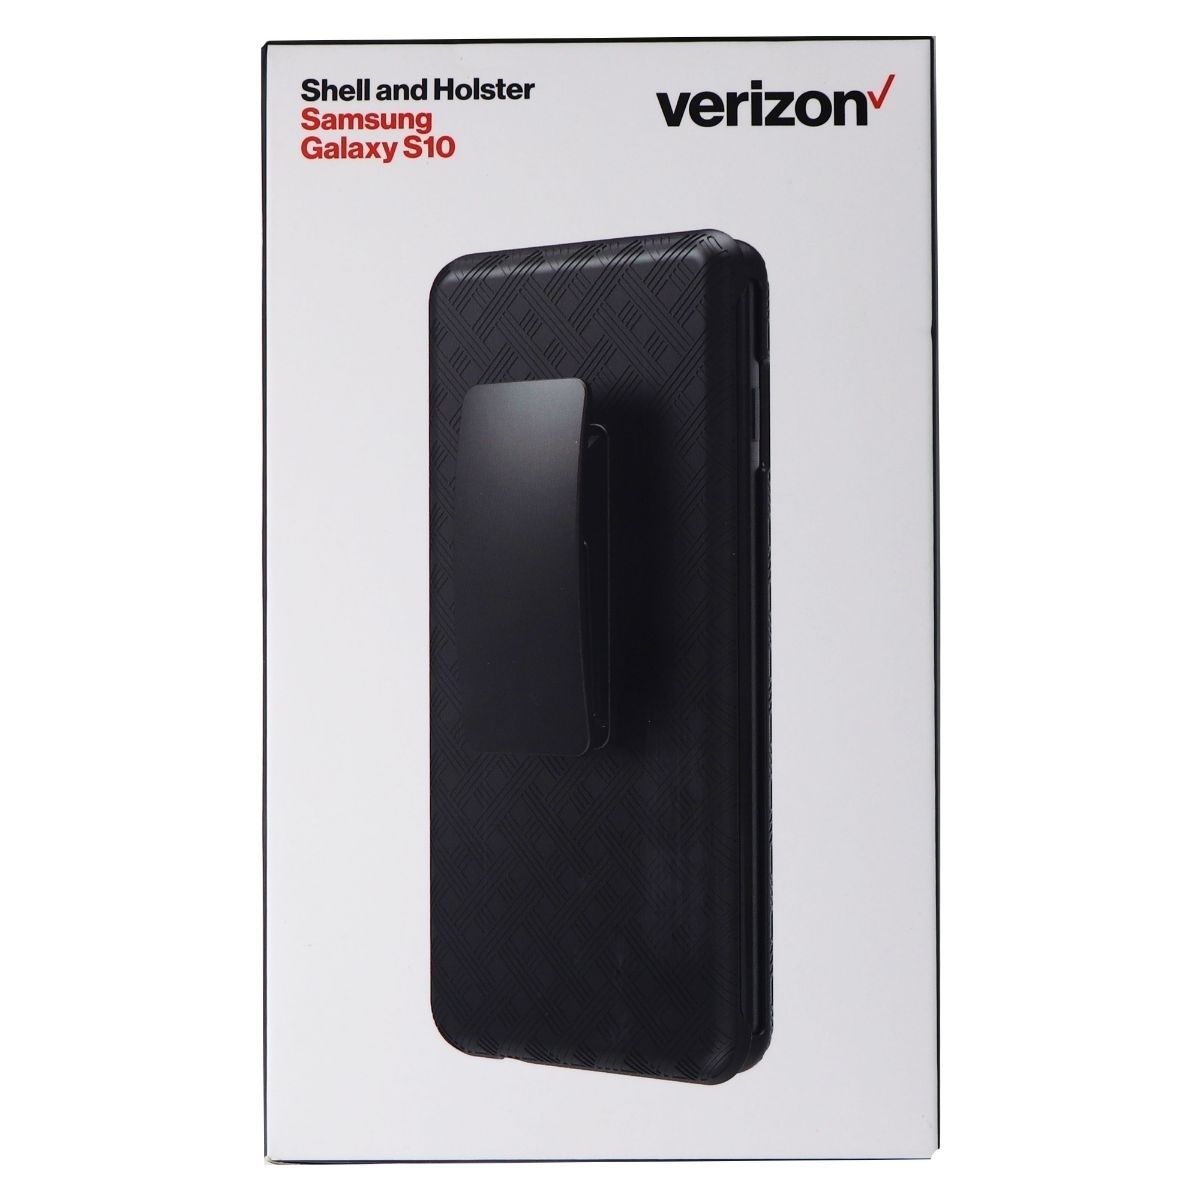 Verizon Shell Case And Holster For Samsung Galaxy S10 Smartphones - Black